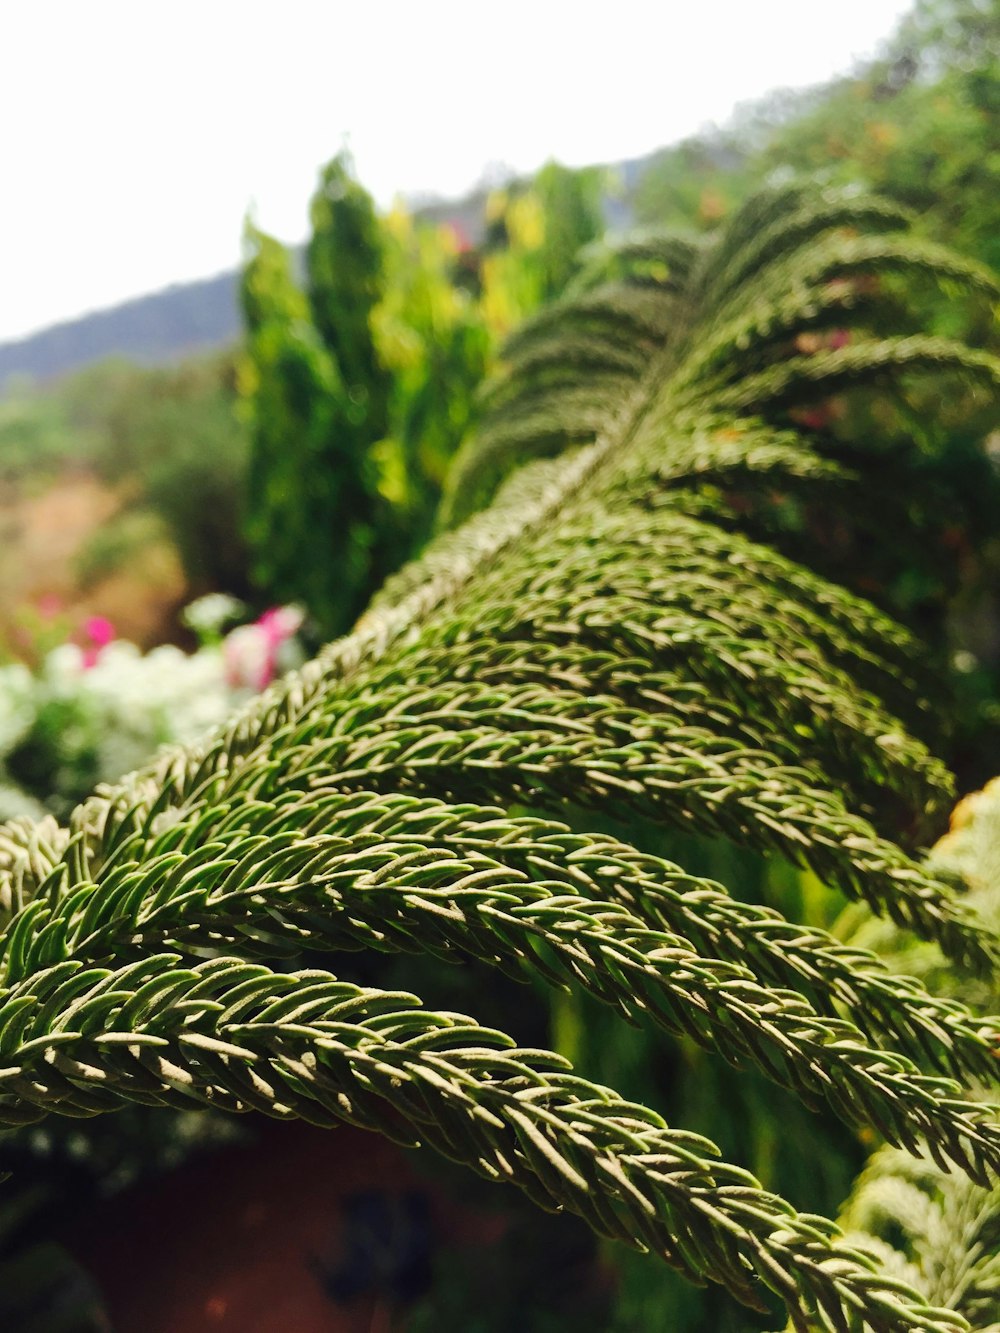 green fern plant in close up photography during daytime